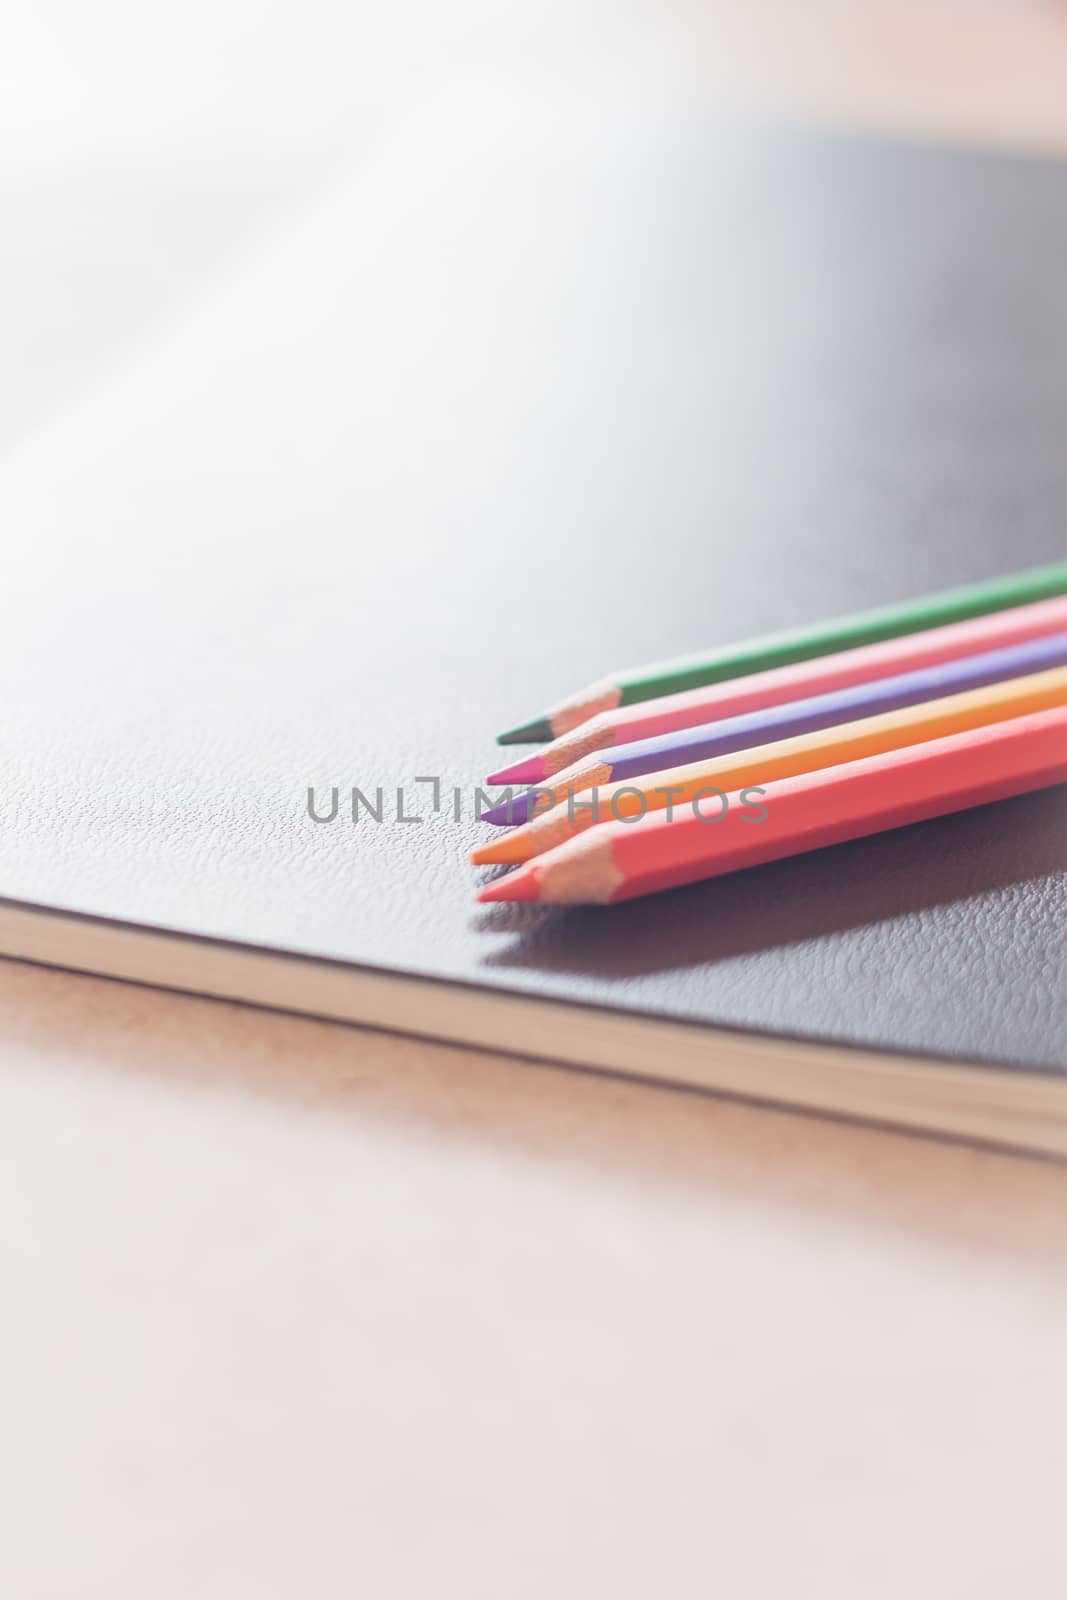 Colorful pencils on black notebook by punsayaporn